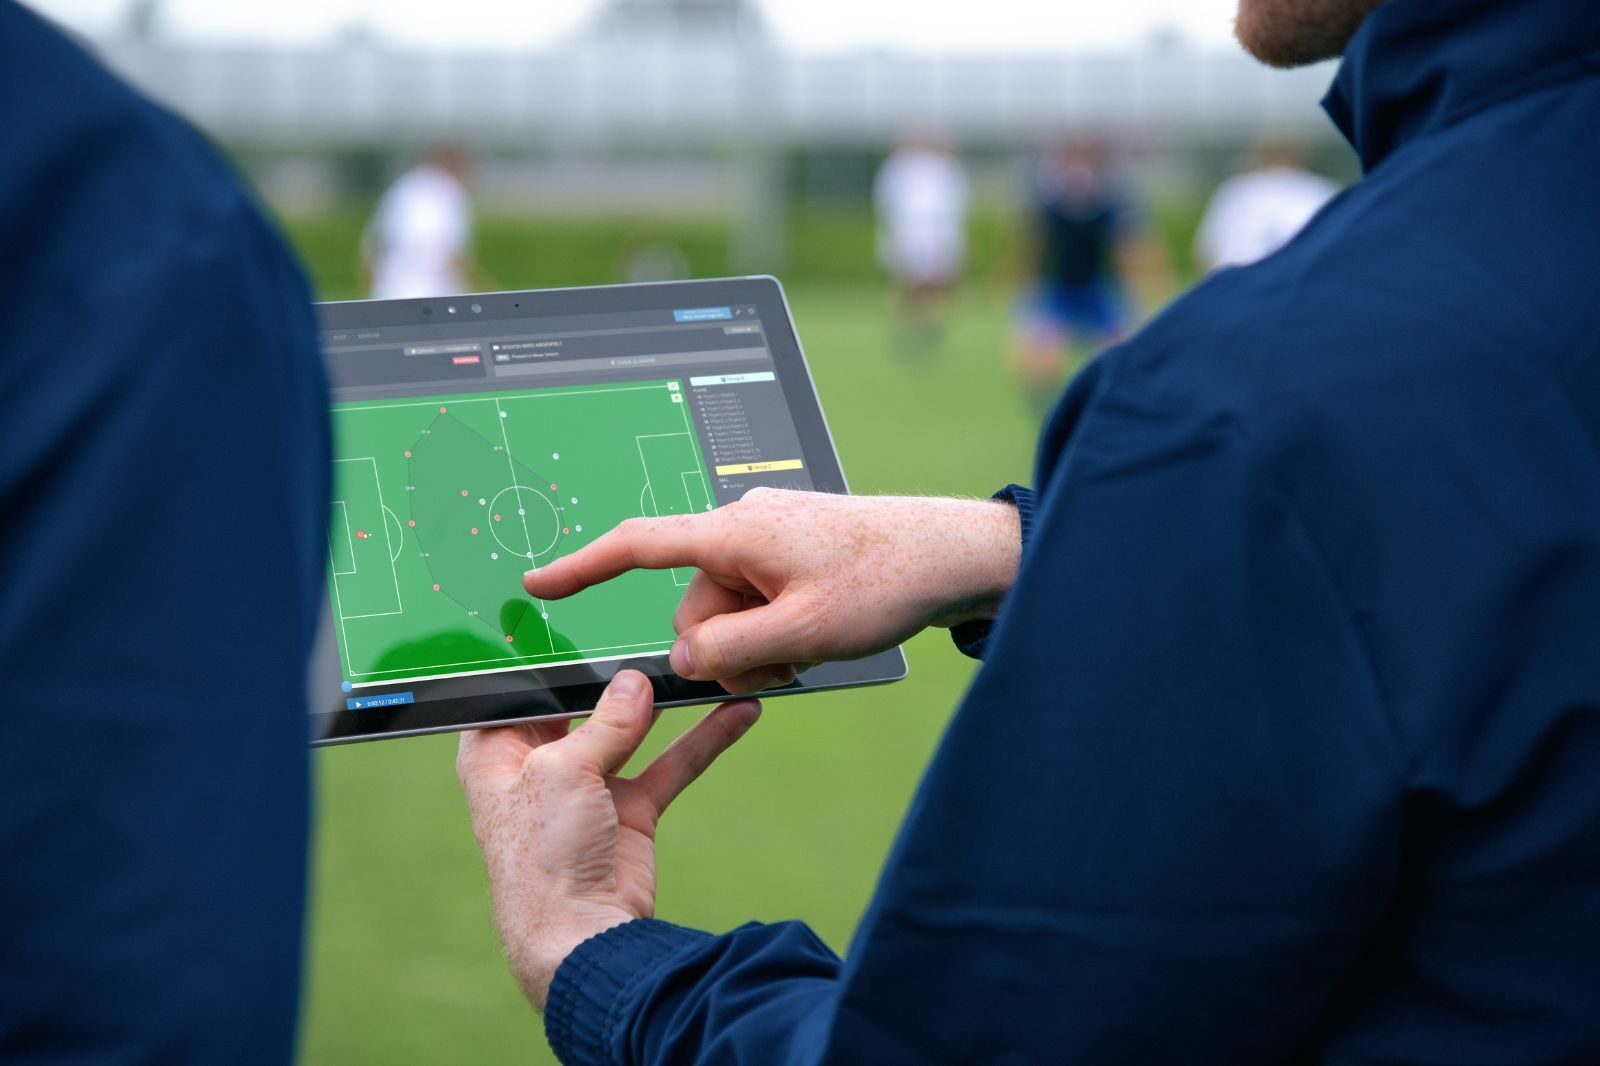 Coaches are using sports data during practices and games to assess how fast and strong athletes are so they can apply the information during games.